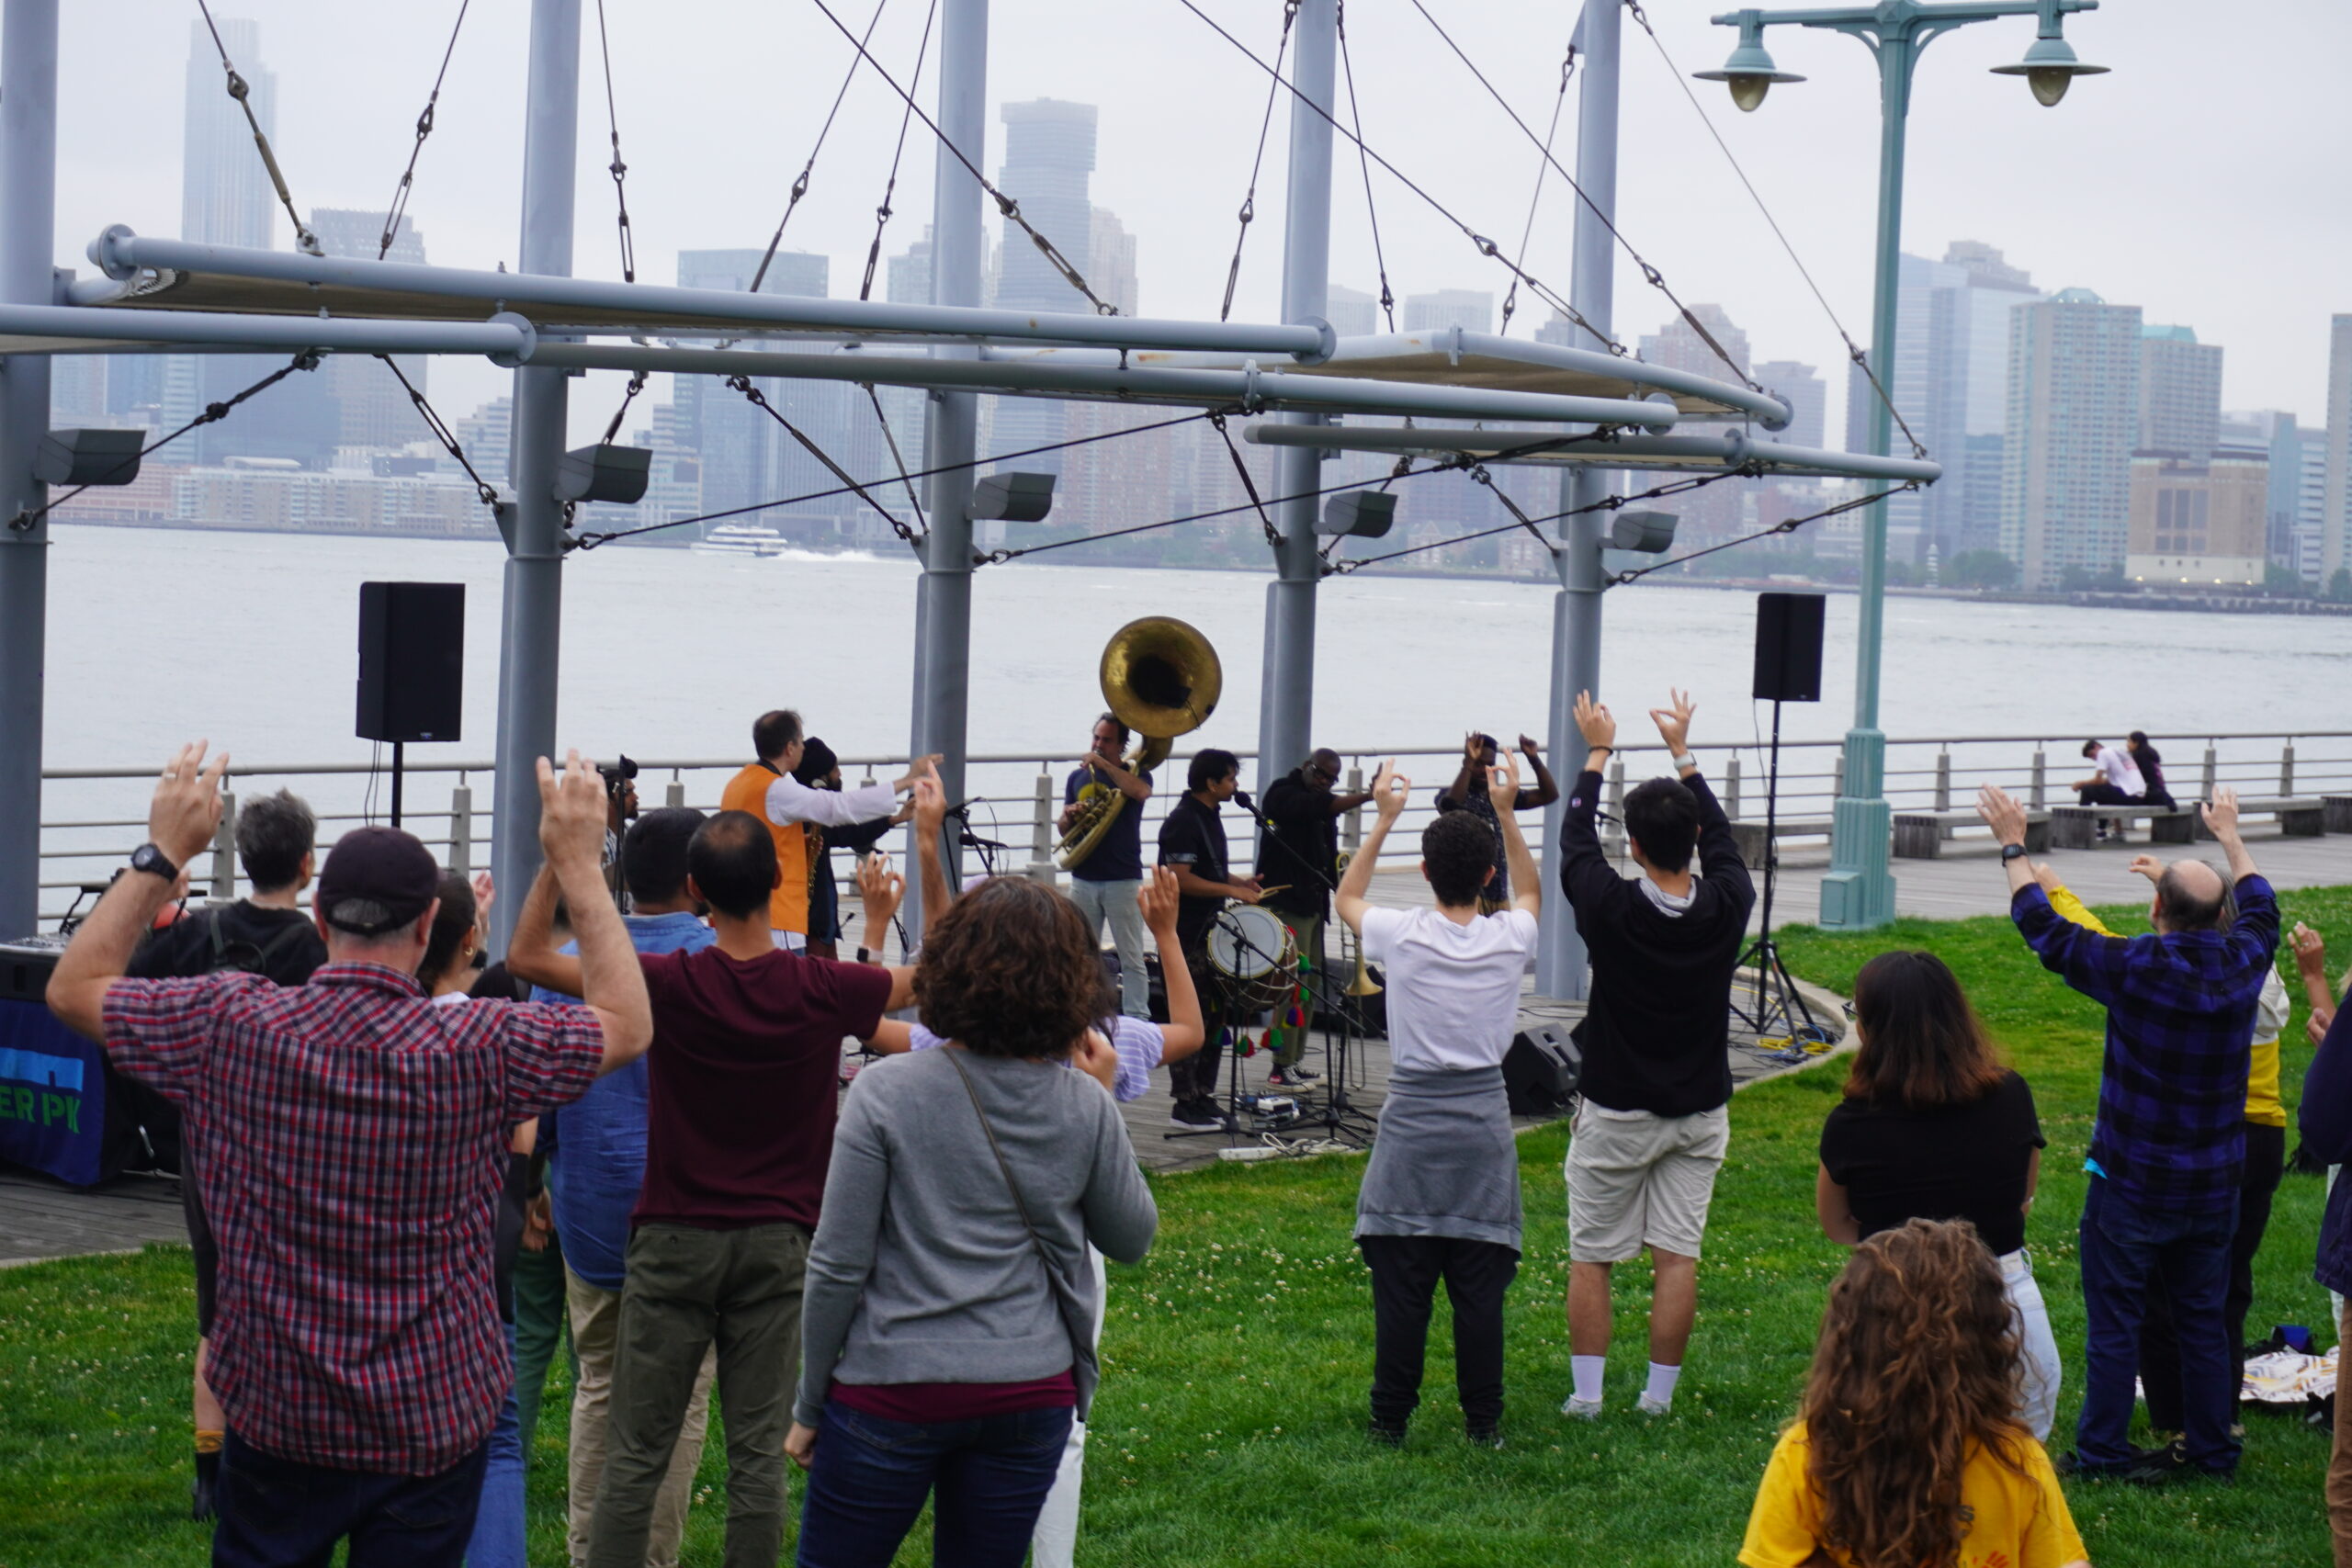 The audience dances on the Pier 45 lawn during a musical performance